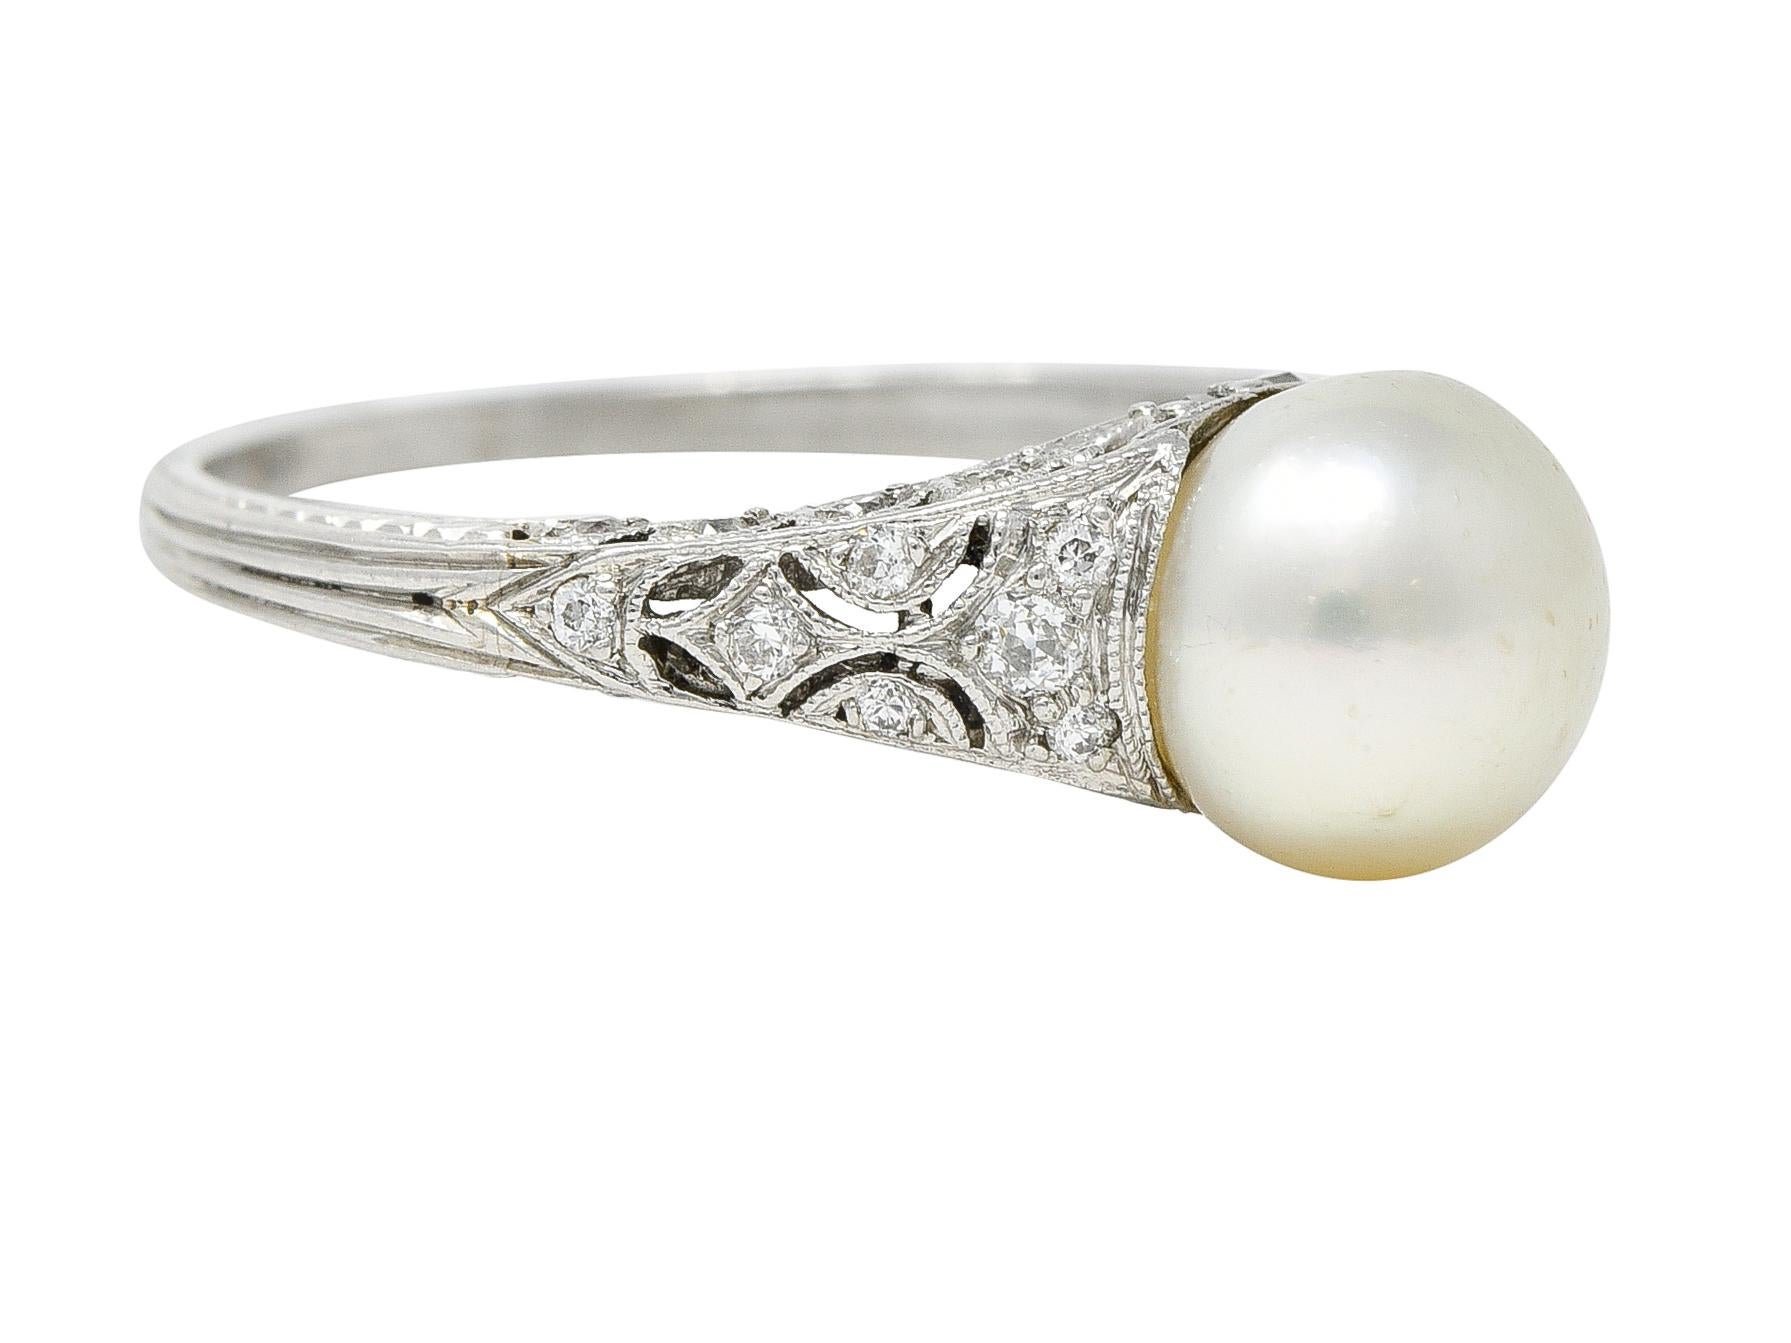 Centering a 7.0 mm round pearl - opaque cream in body color with moderate iridescence. Flanked by pierced geometric shoulders with a pierced scrolling ivy motif gallery. Accented by single and old European cut diamonds bead set throughout. Weighing